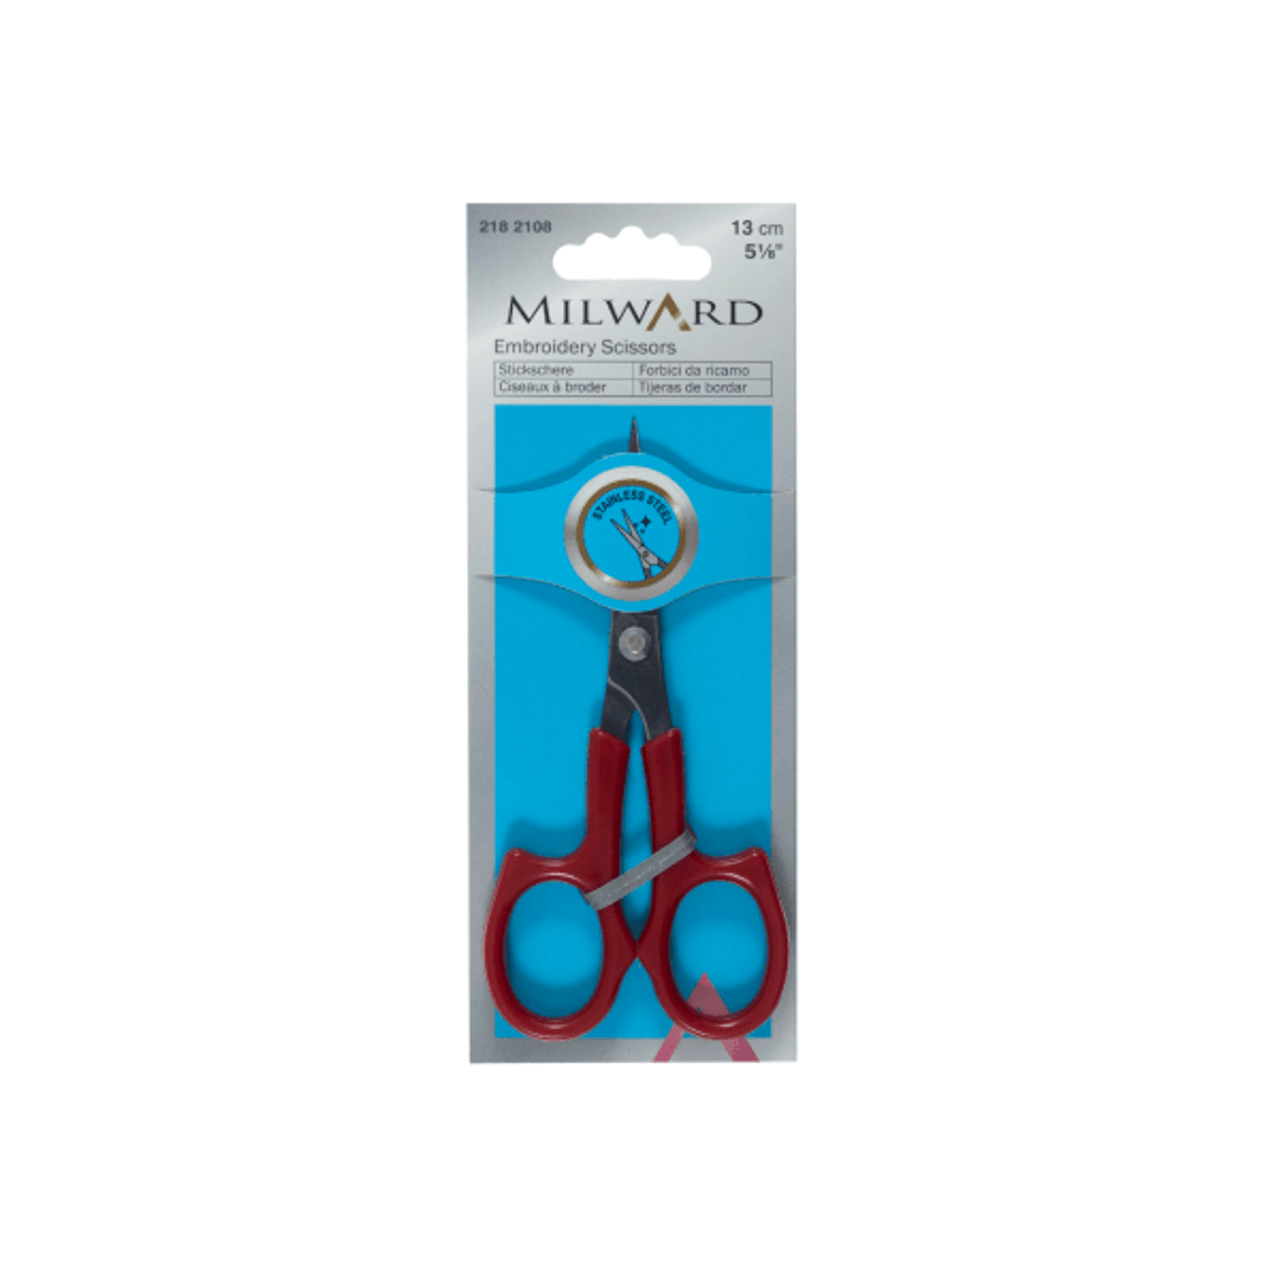 Milward 5.12" Scissors: A Must-Have for Sewing Enthusiasts